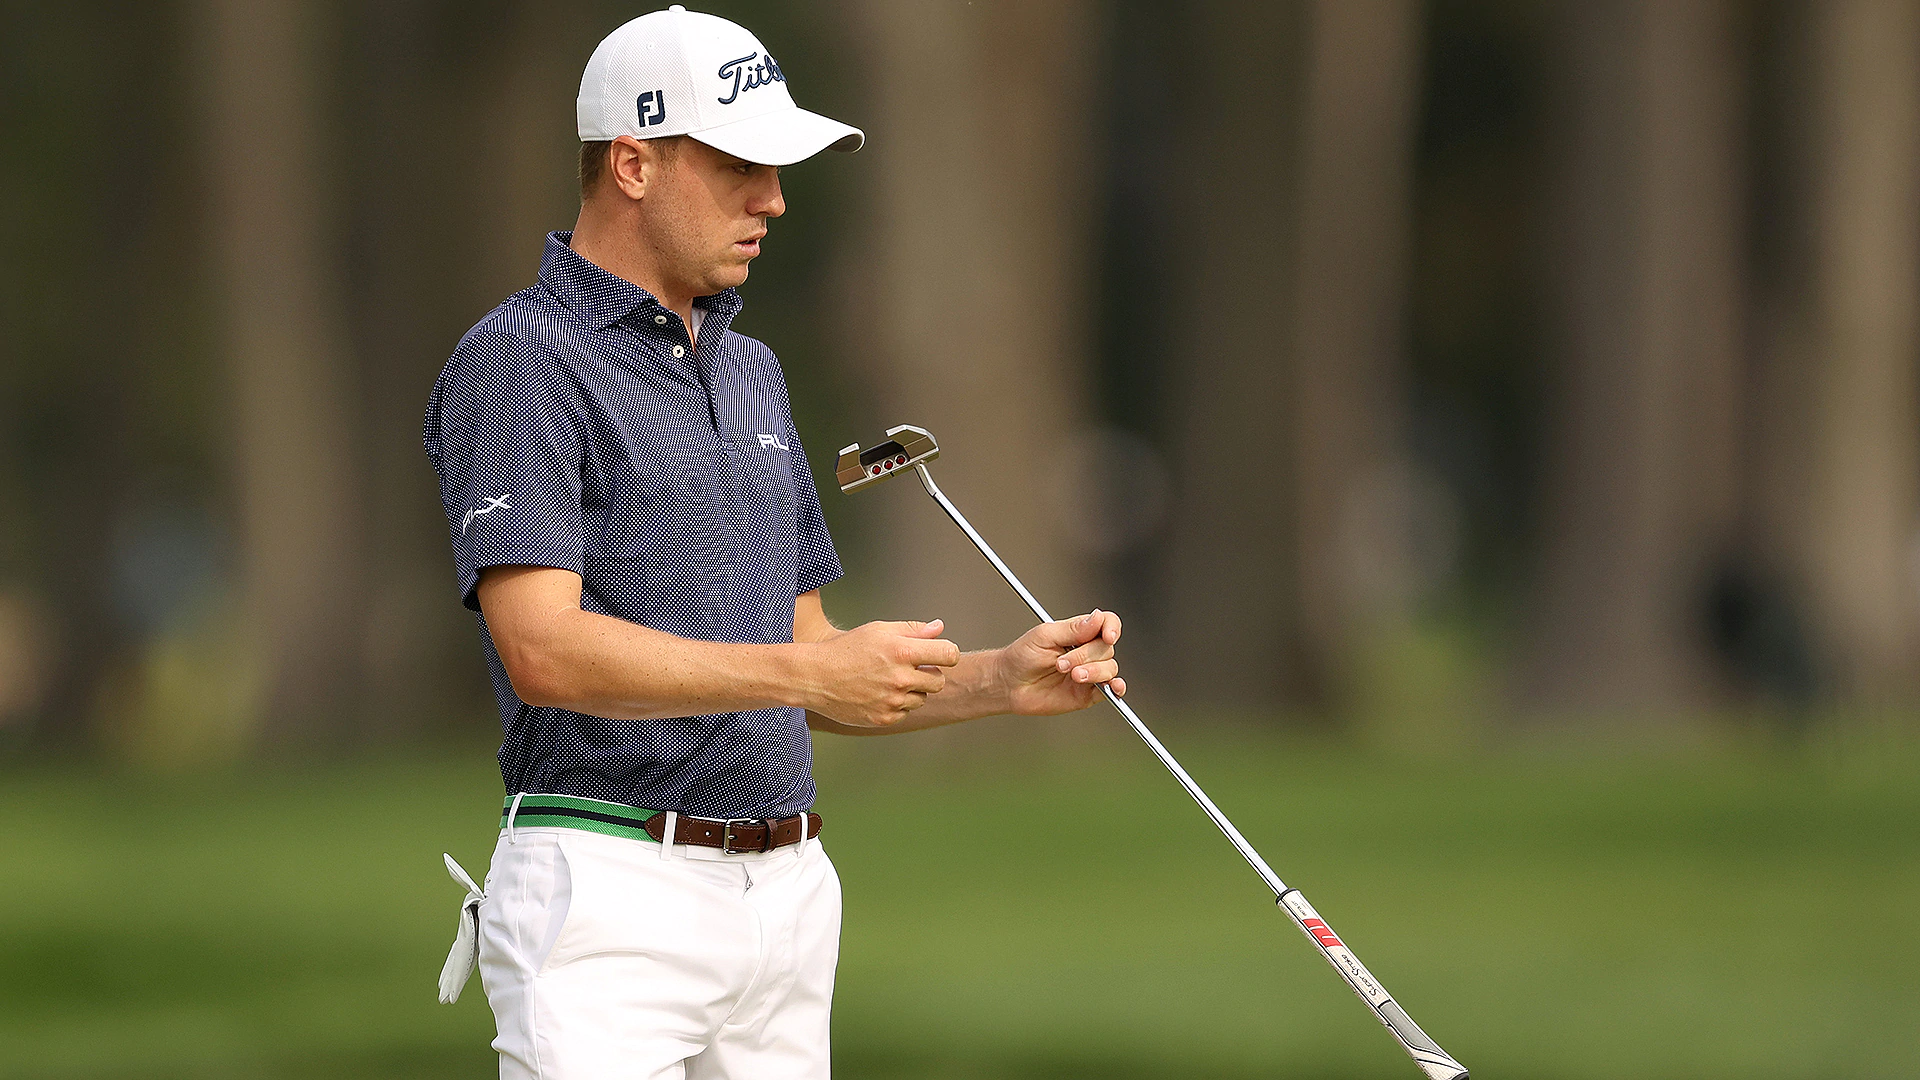 Justin Thomas shoots 65 at Winged Foot after working with new putting coach 2